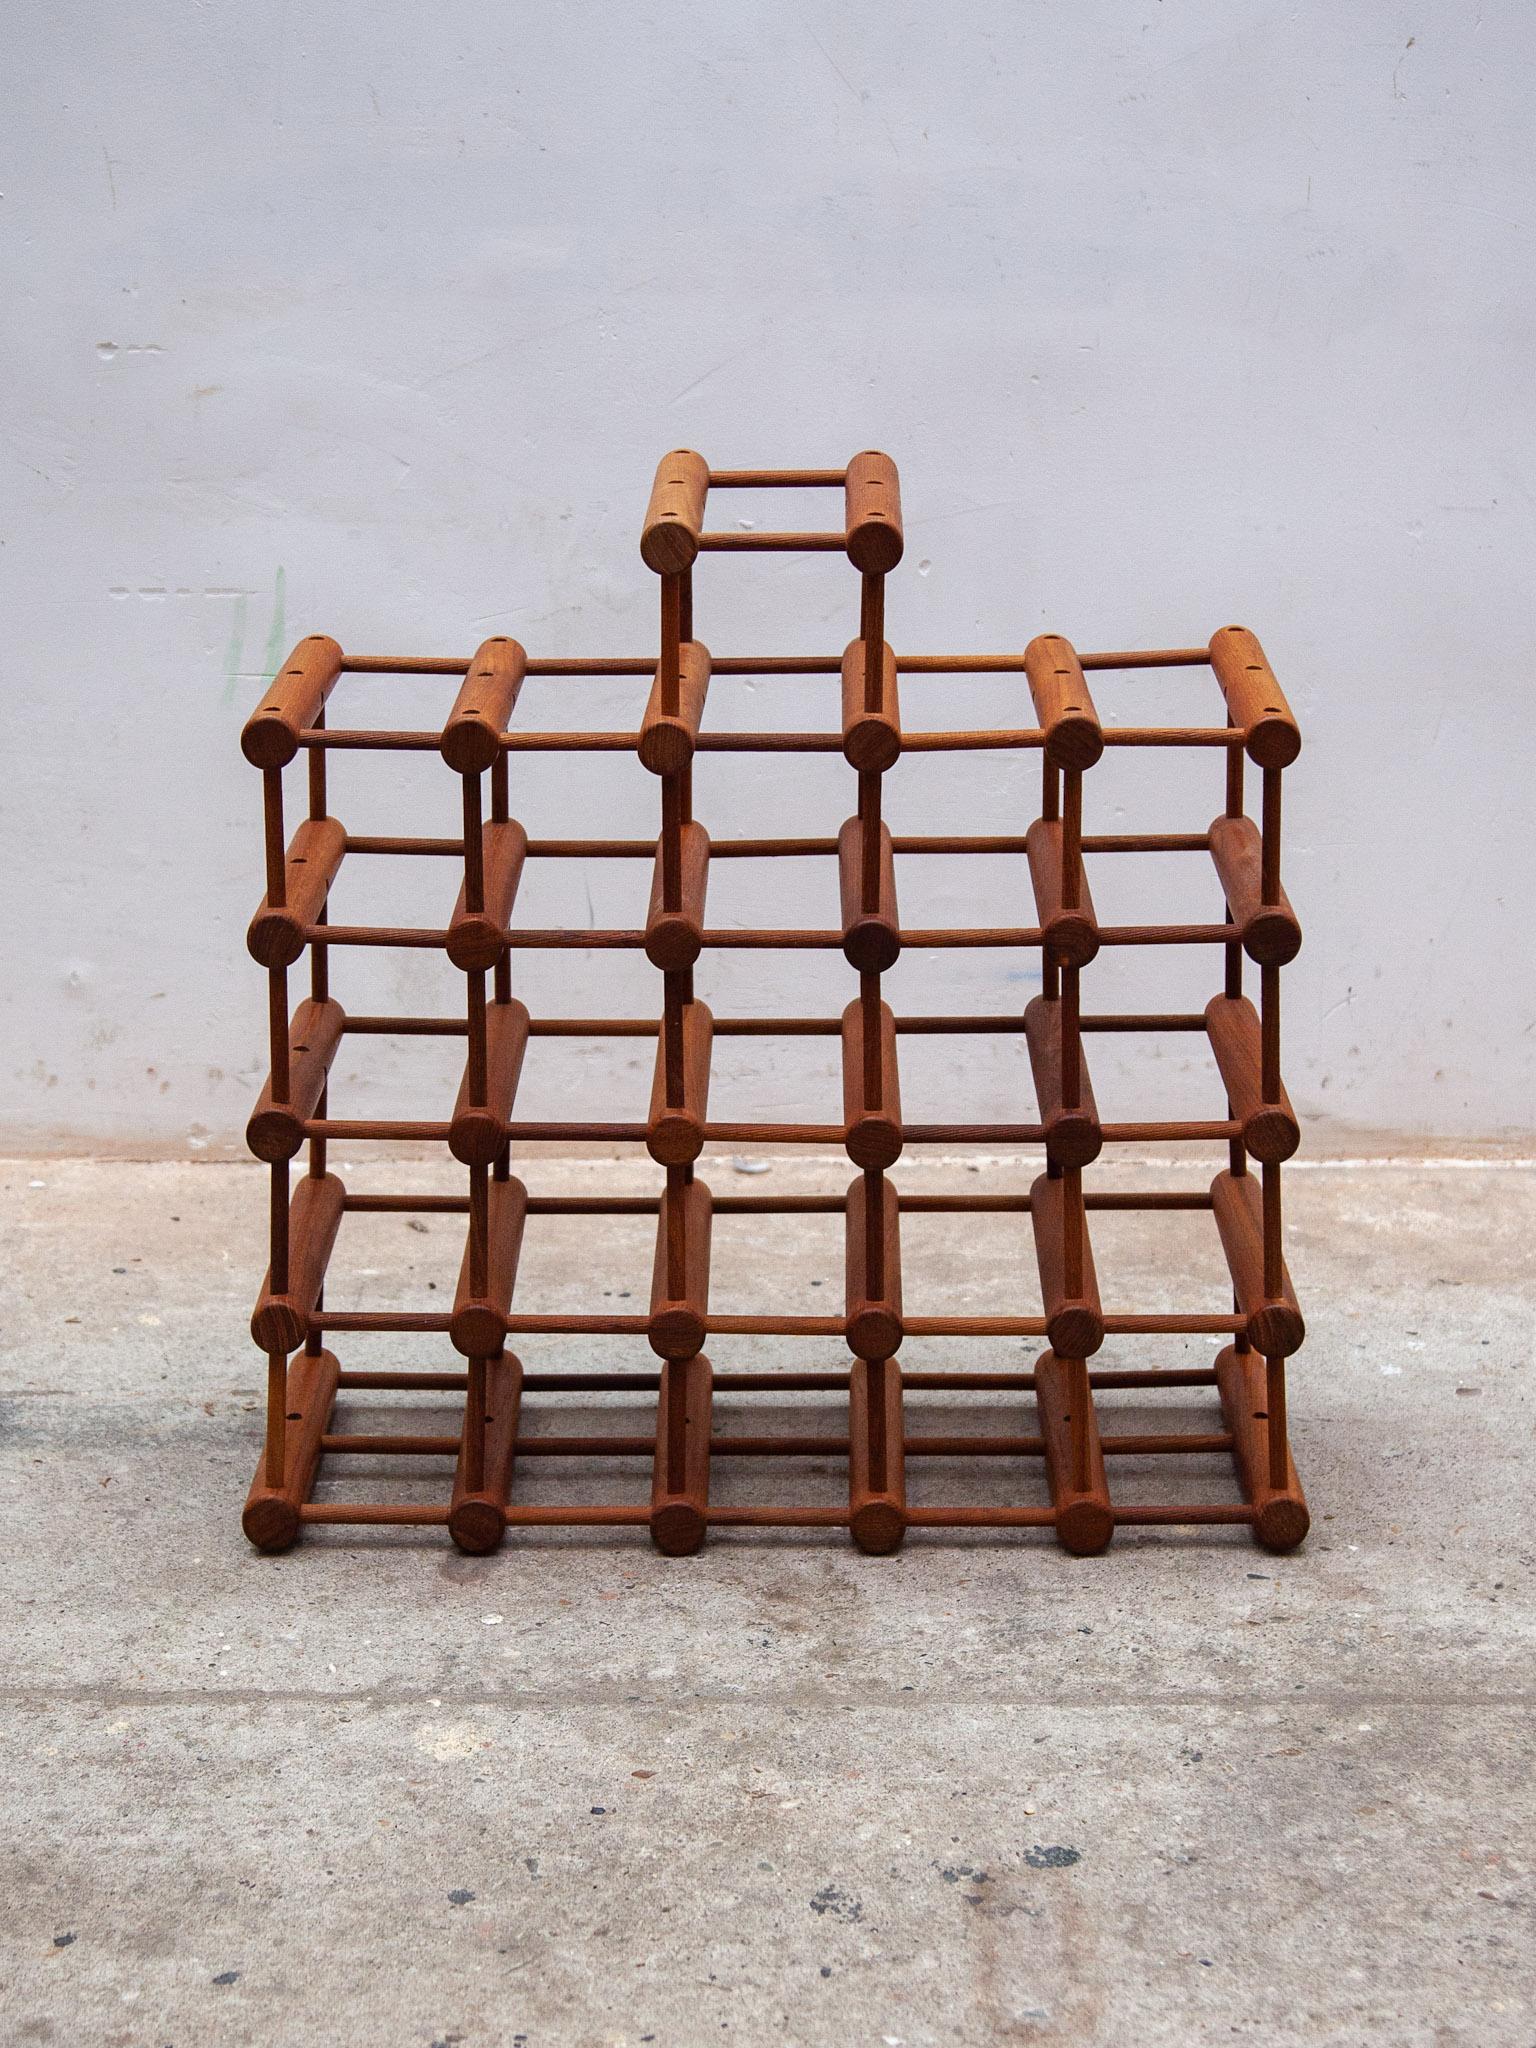 Original Danish teak modular wine rack designed by Richard Nissen and made in Denmark by Langaa. This rack to use for 26 wine bottles has an ingenious design consisting of solid teak pegs and dowels which can be taken apart and reconfigured in any